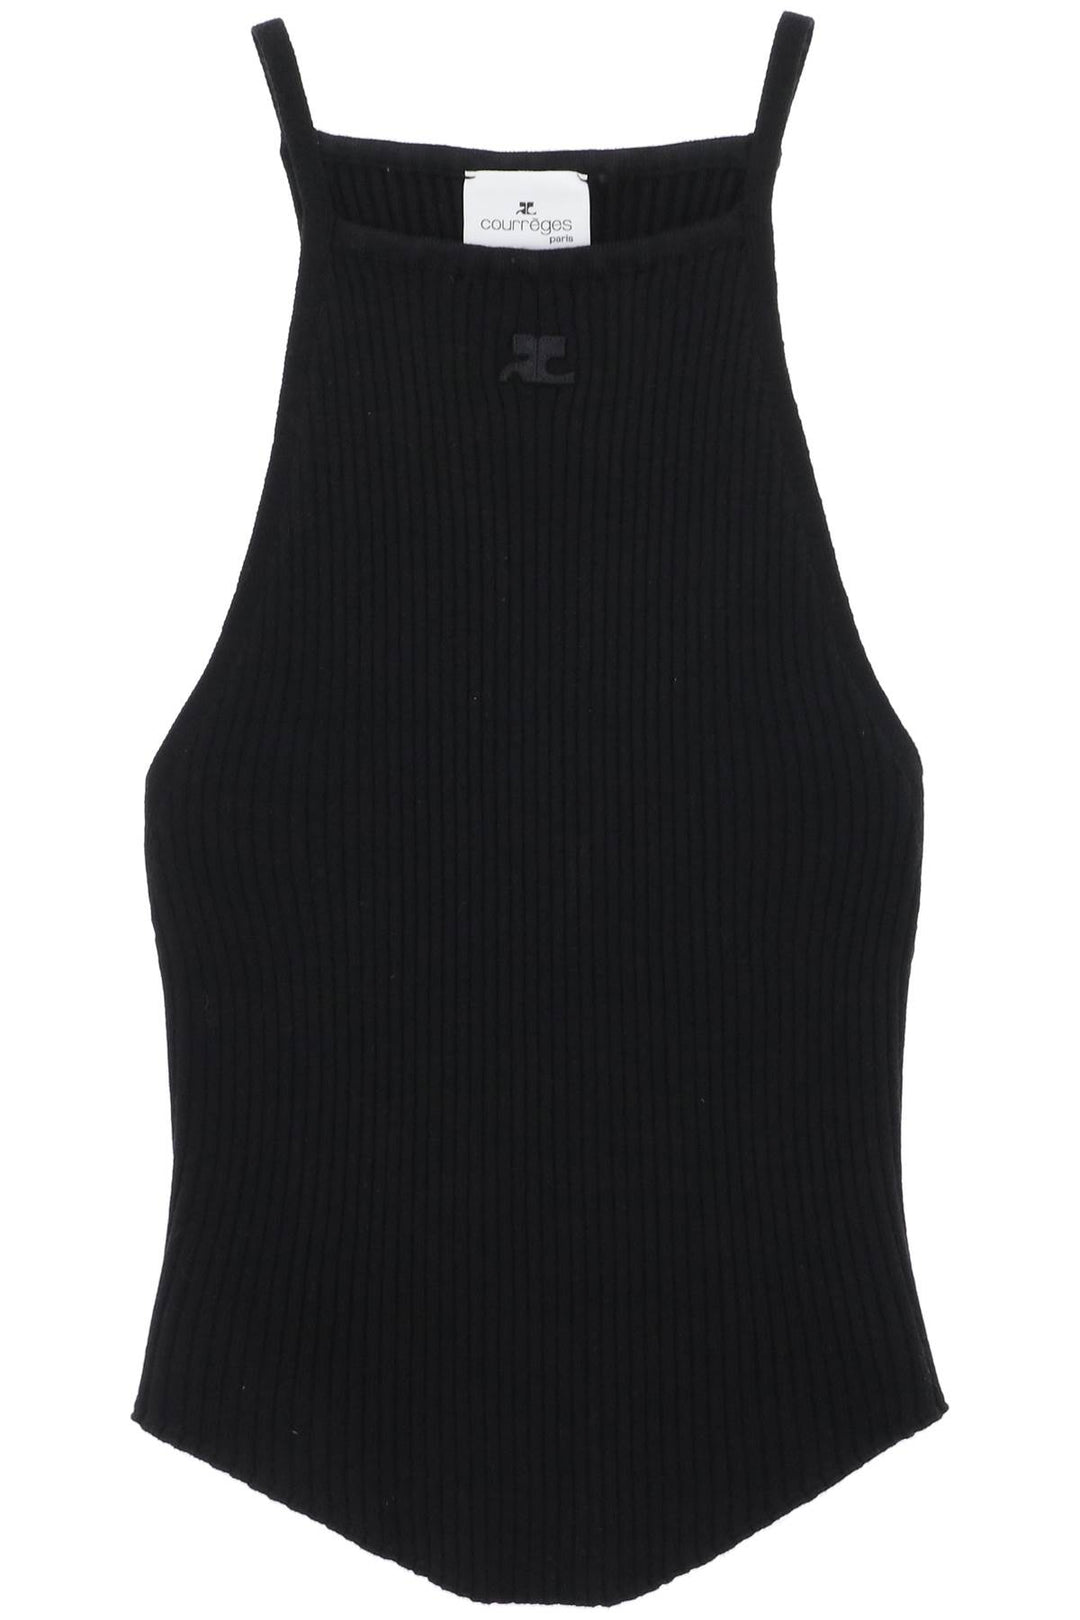 Courreges Replace With Double Quoteribbed Knit Holistic Top   Nero